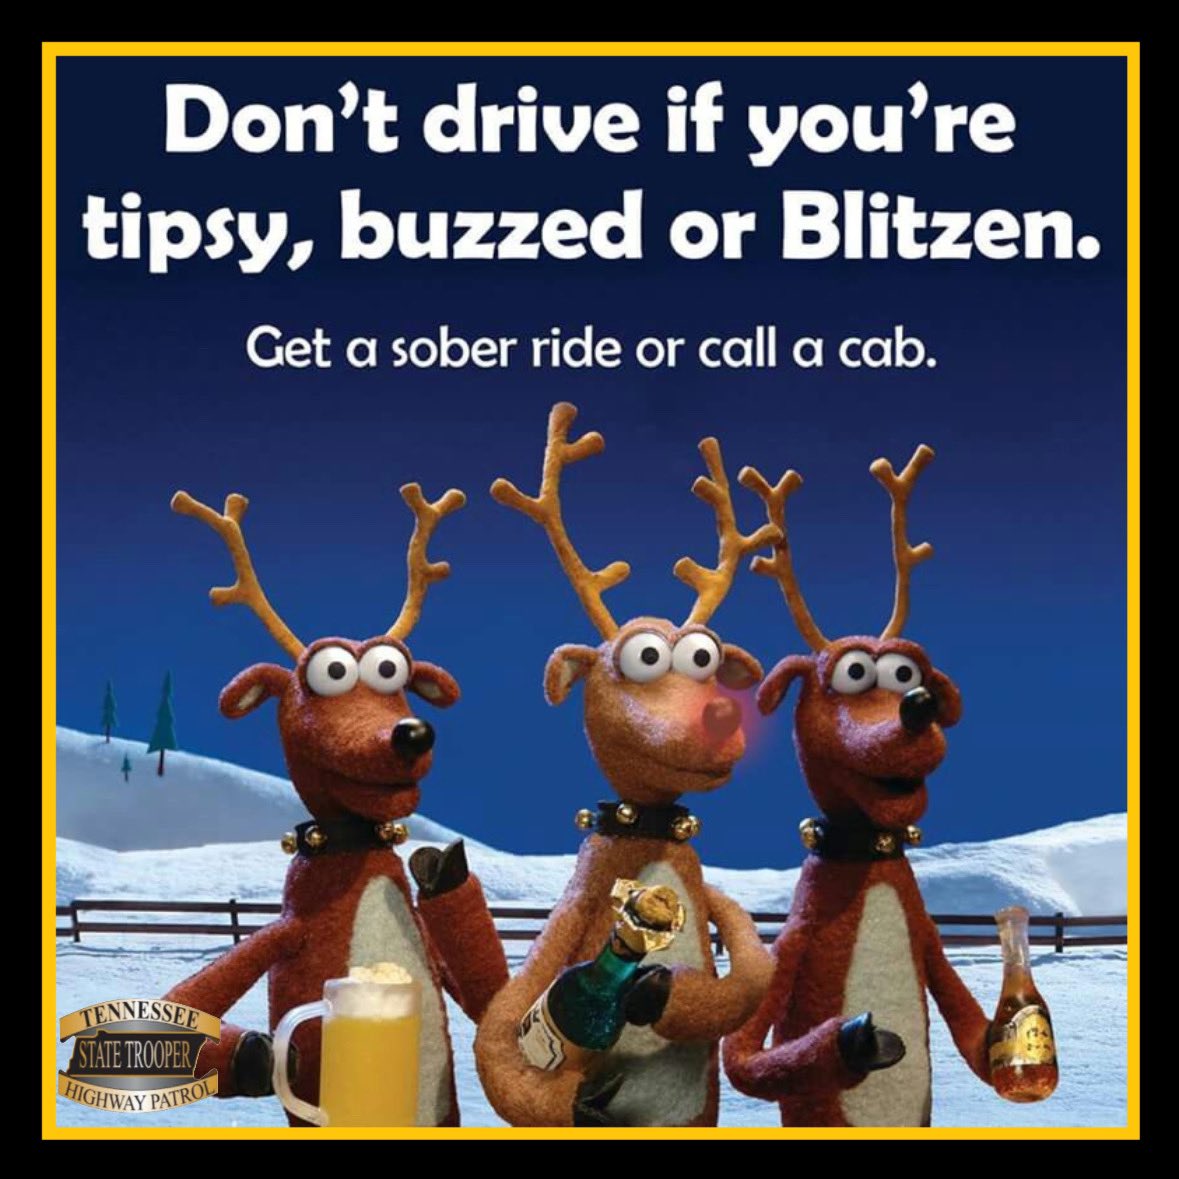 🚫🍻 This holiday season, let's prioritize safety and responsibility. Don't let a celebration turn into a tragedy. Say NO to drinking and driving. Your choices can save lives. #DriveSafe #HolidaySafety 🚗✨